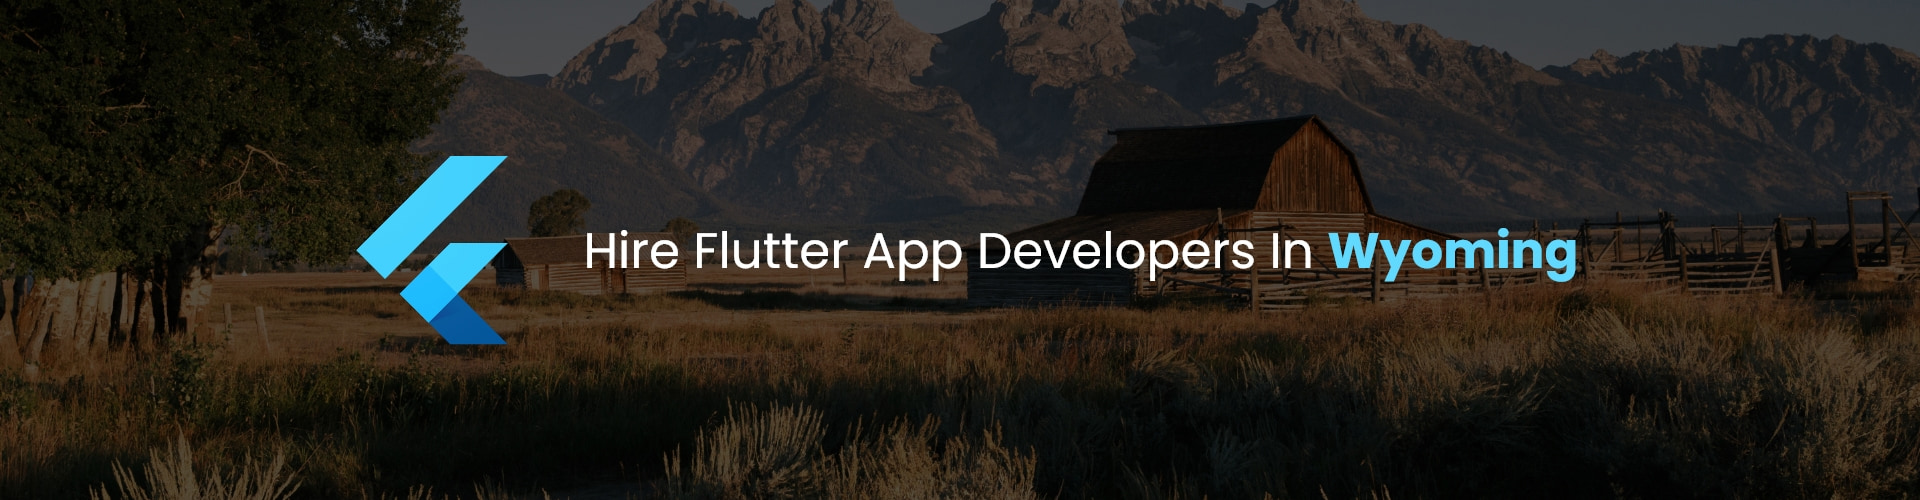 hire flutter app developers in wyoming